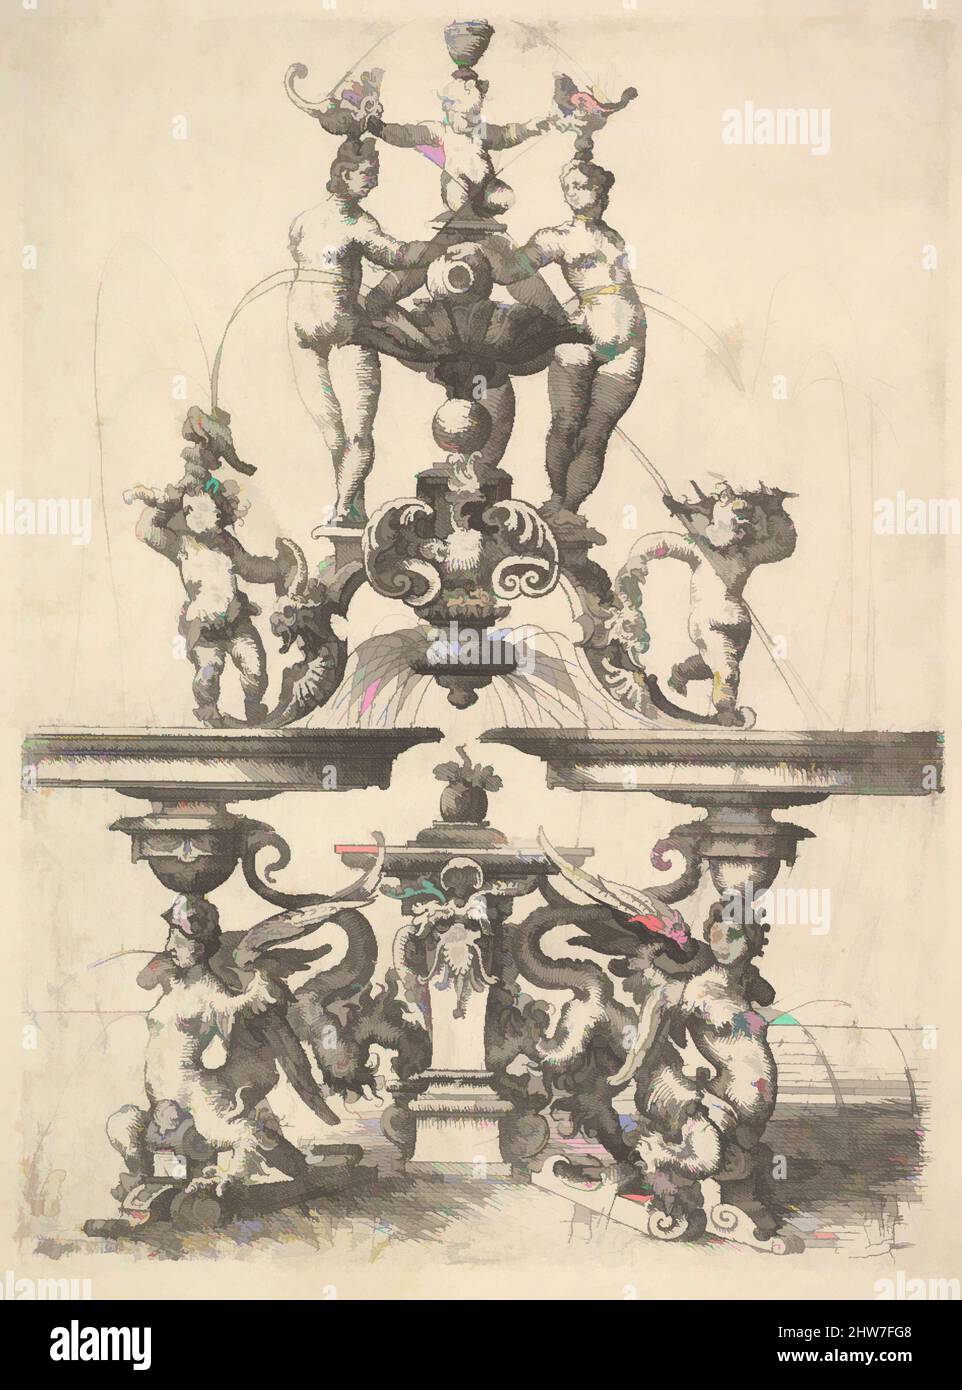 Art inspired by Design for a Fountain, Plate 119 from Dietterlin's Architectura, 1598, Etching, sheet: 12 5/8 x 8 1/8 in. (32 x 20.6 cm), Wendel Dietterlin, the Elder (German, Pfullendorf 1550/51–ca. 1599 Strasbourg, Classic works modernized by Artotop with a splash of modernity. Shapes, color and value, eye-catching visual impact on art. Emotions through freedom of artworks in a contemporary way. A timeless message pursuing a wildly creative new direction. Artists turning to the digital medium and creating the Artotop NFT Stock Photo